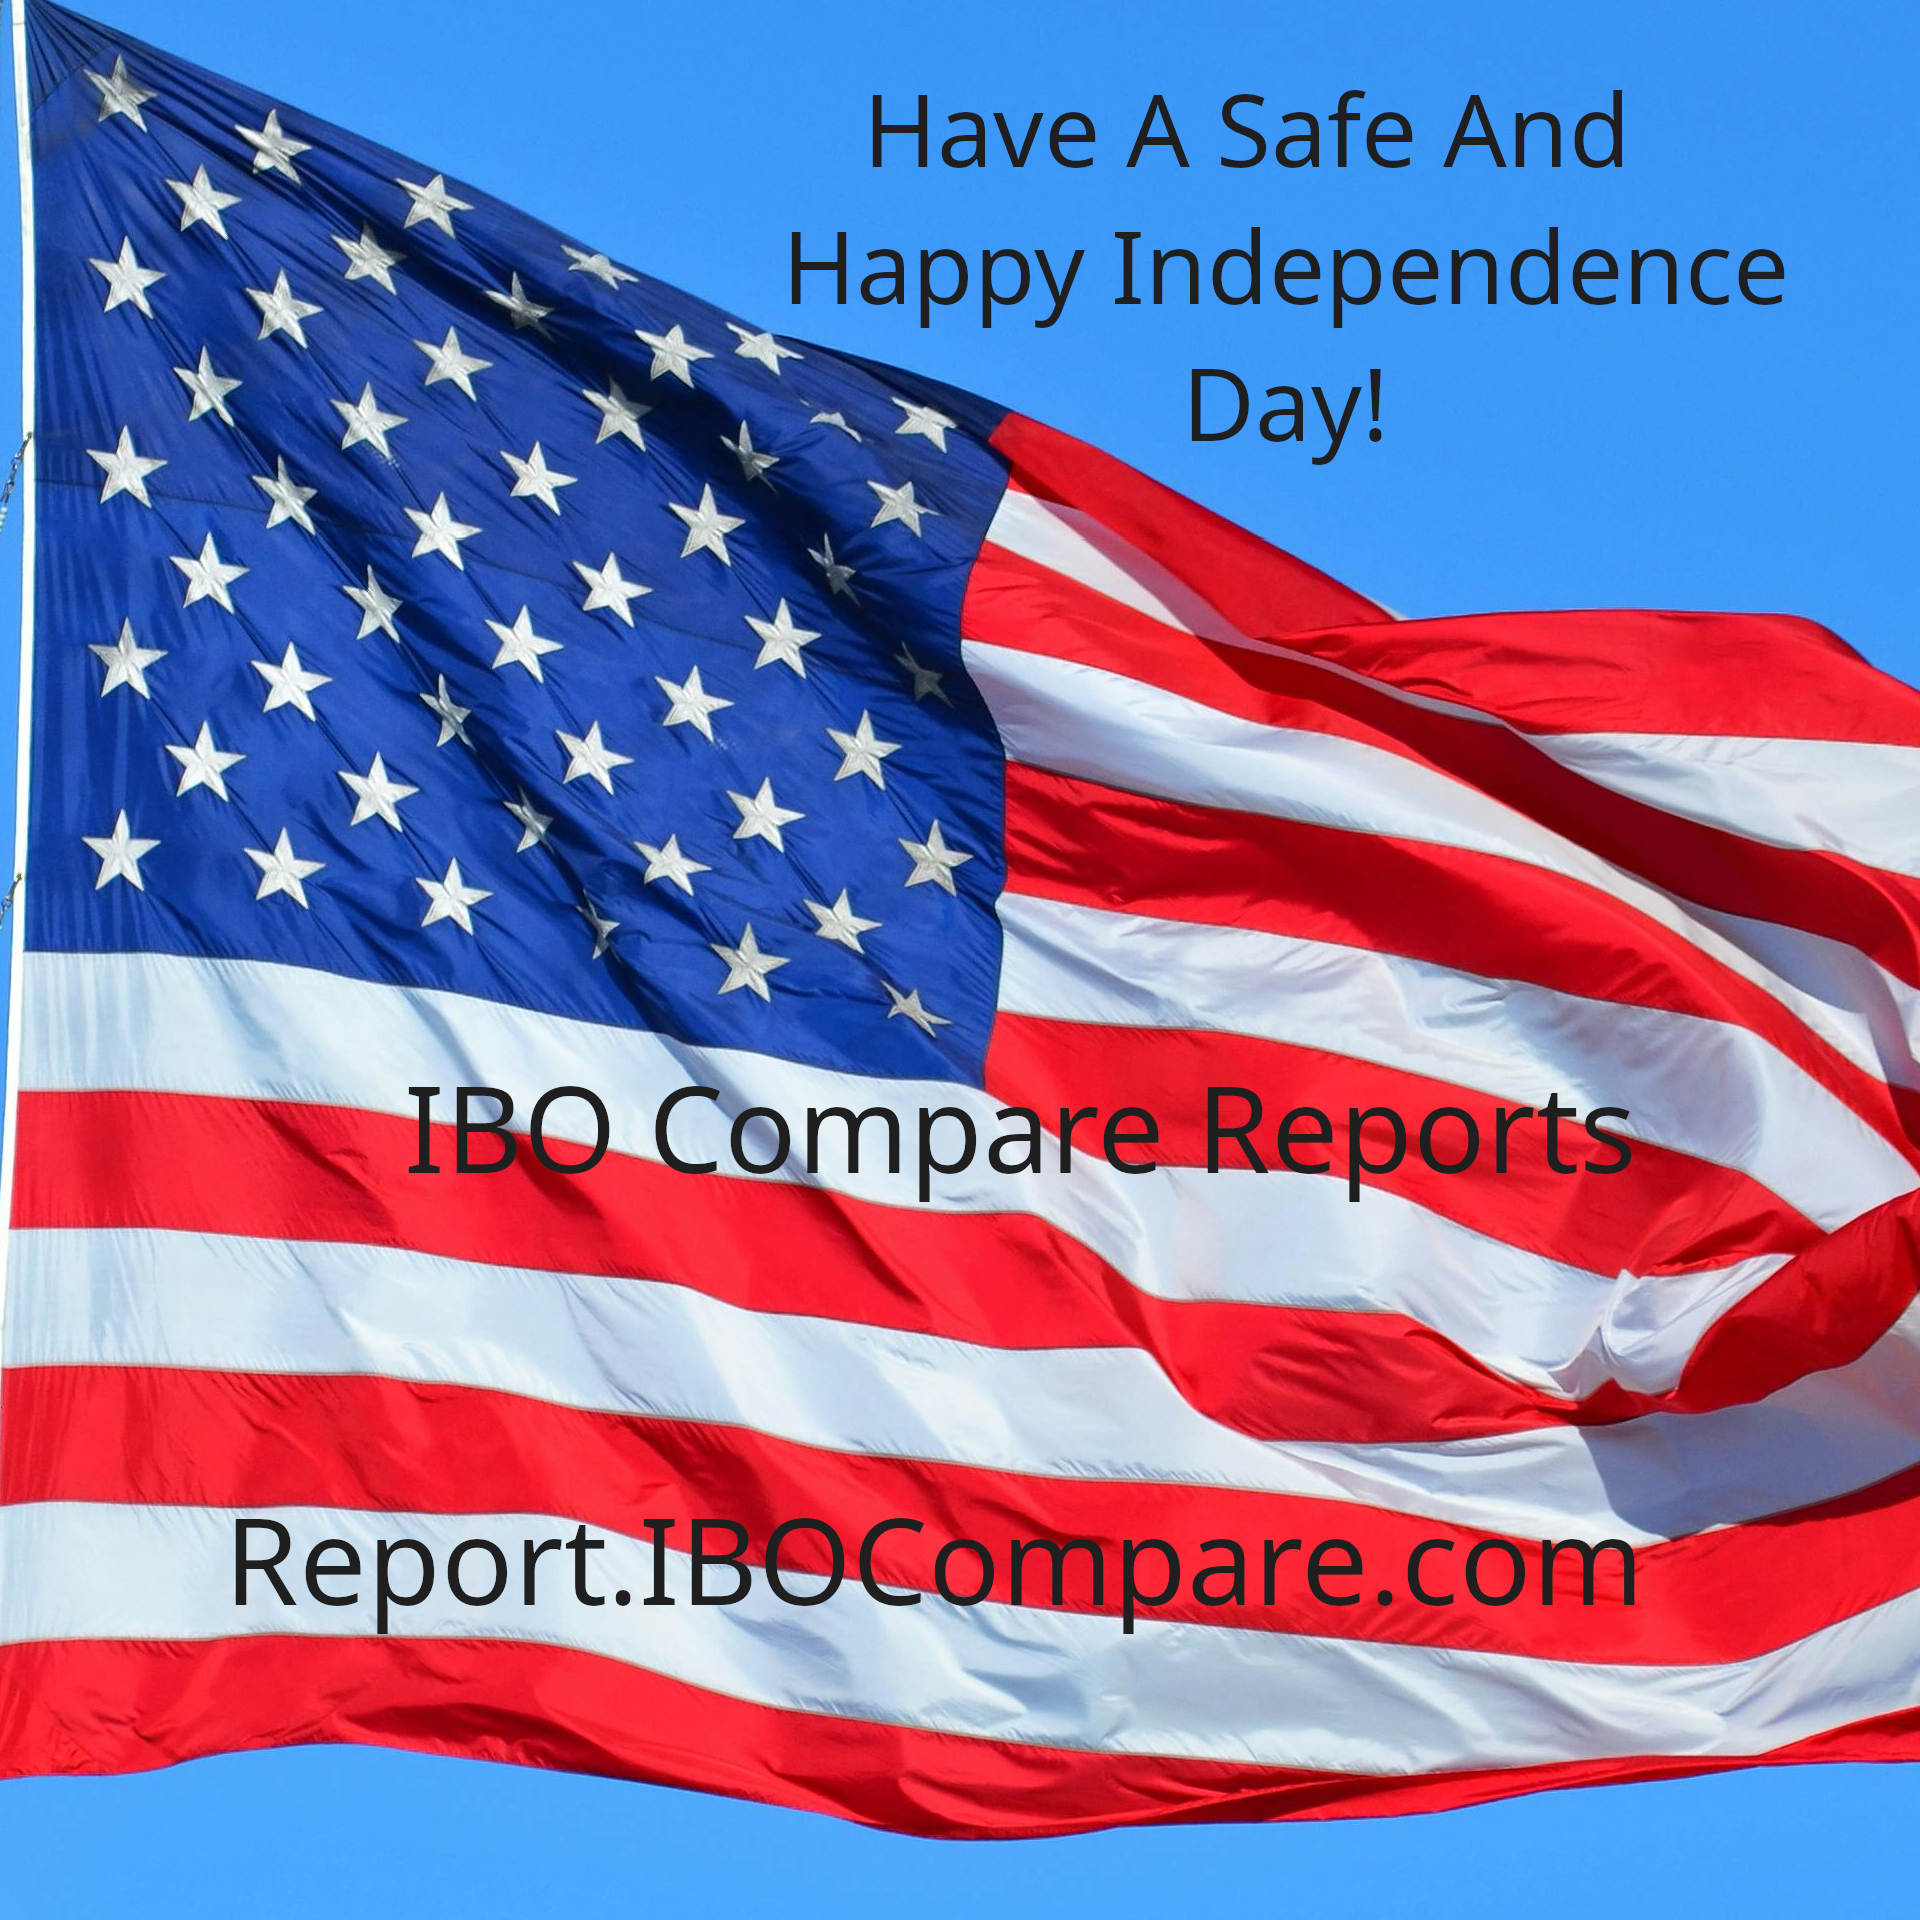 Have A Safe and Happy Independence Day